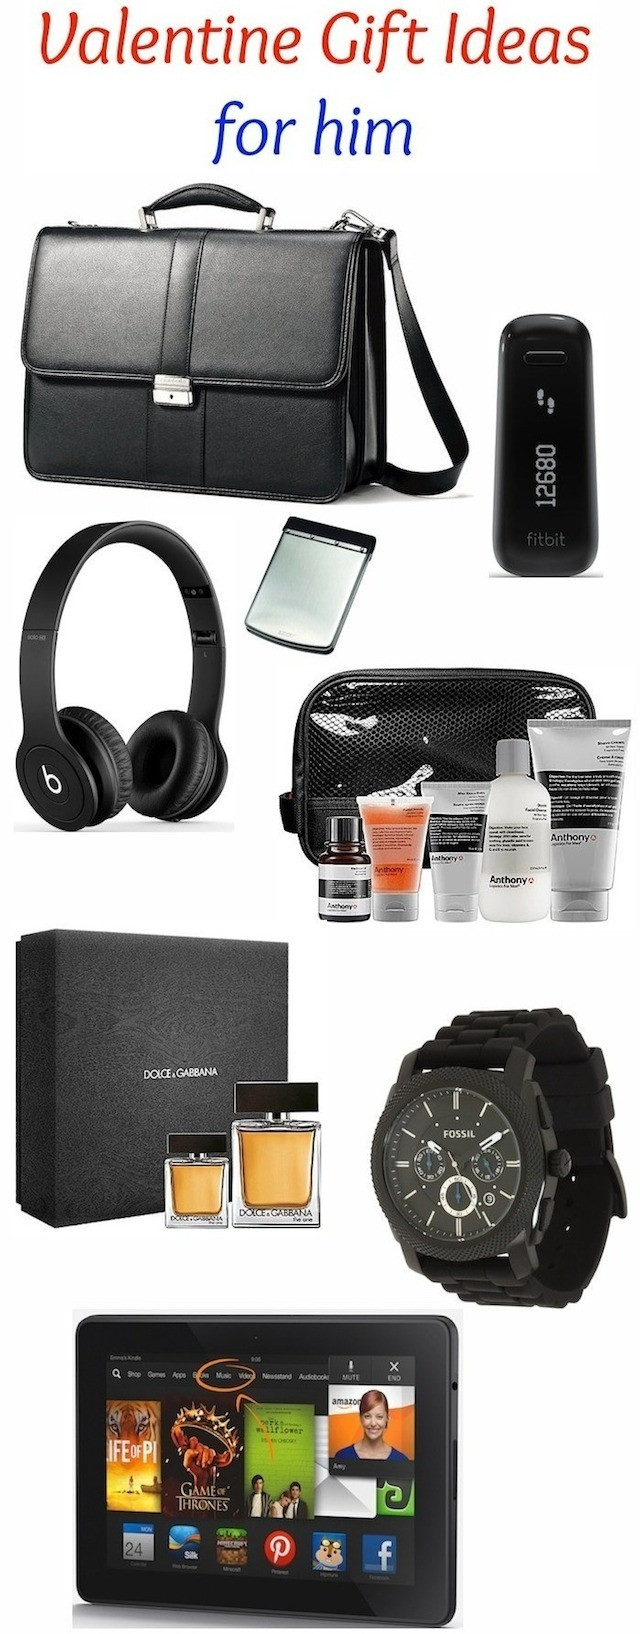 Gift Ideas For Him Valentines
 Valentine s Day Gift Ideas for him